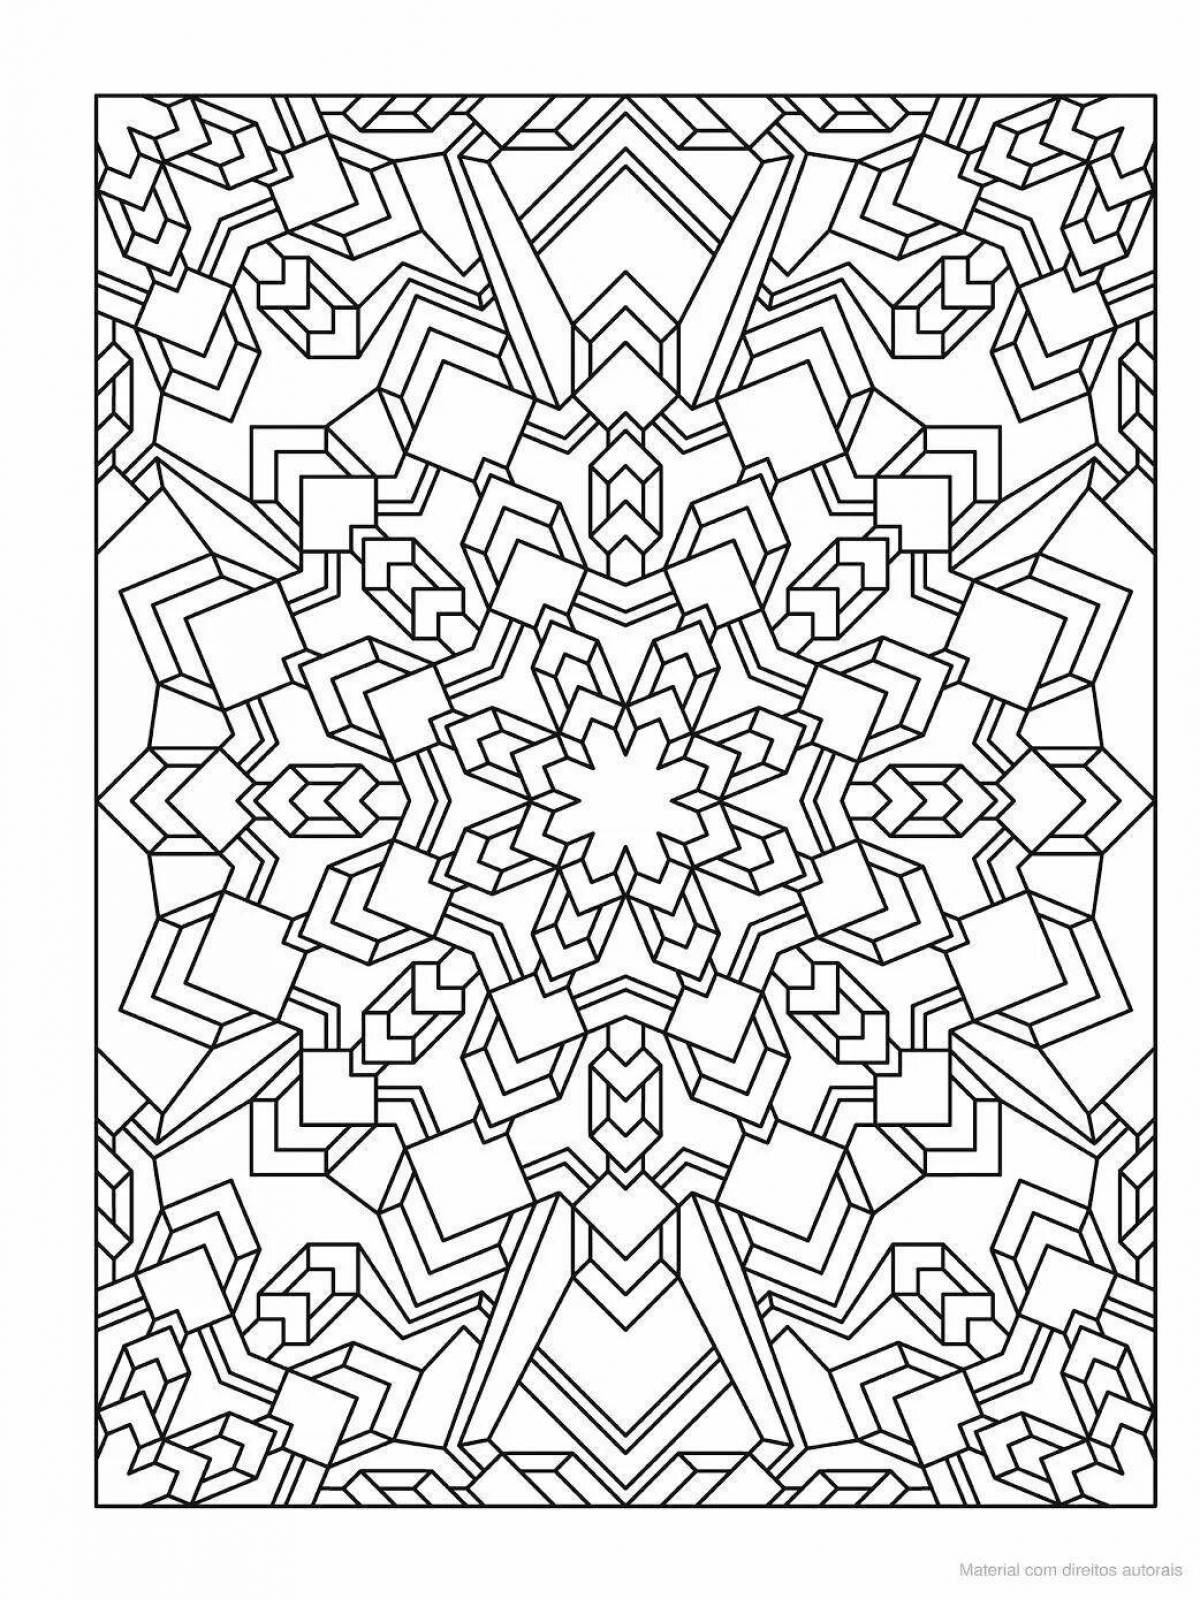 Peaceful coloring to relax the nervous system